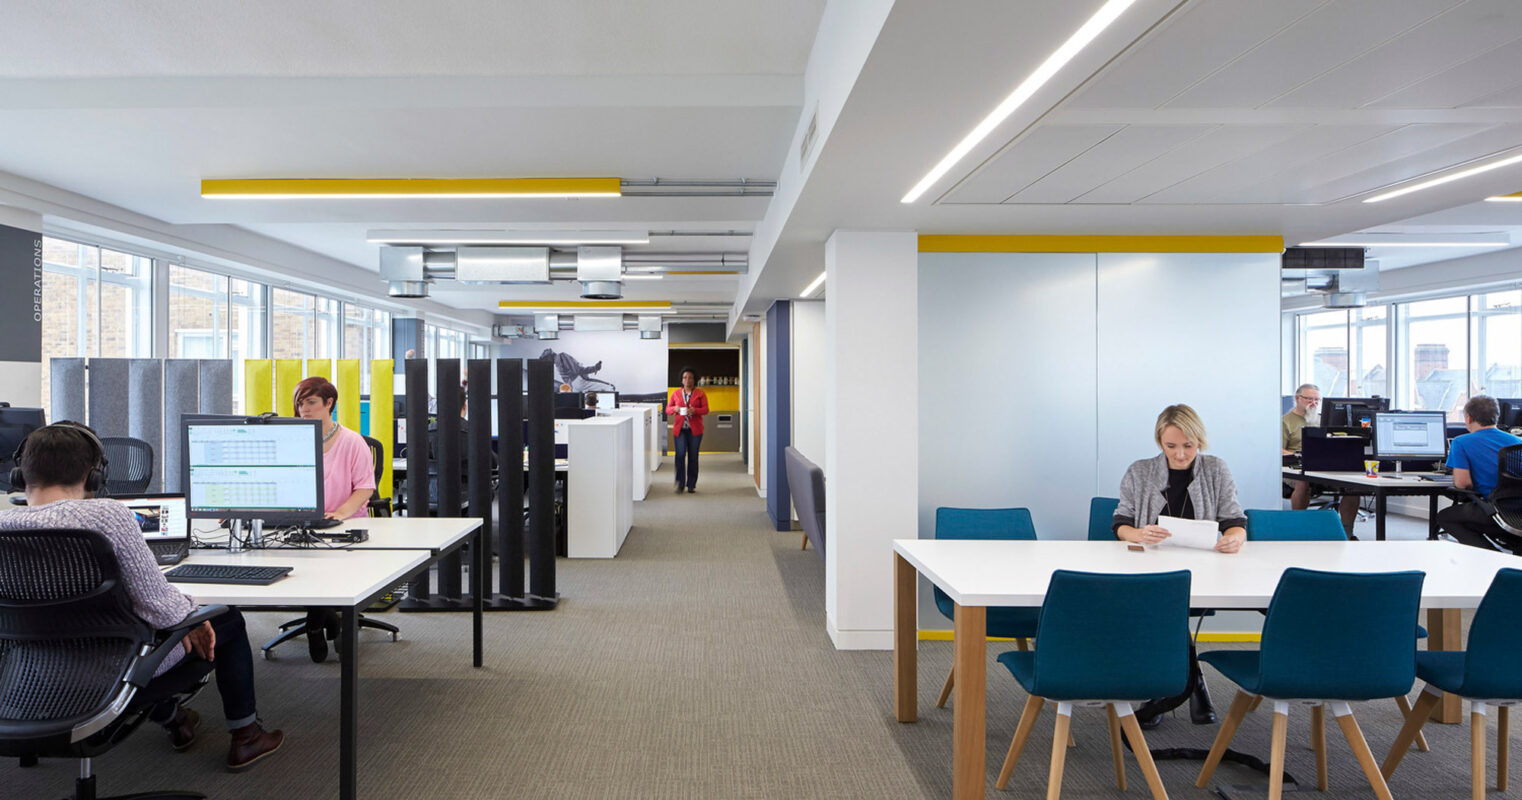 Modern office space featuring minimalistic workstations with white desks and ergonomic chairs. The open-plan area is punctuated by colorful acoustic panels, offering privacy and sound management. Daylight complements the LED strip lighting, casting a warm ambiance across the productive environment.